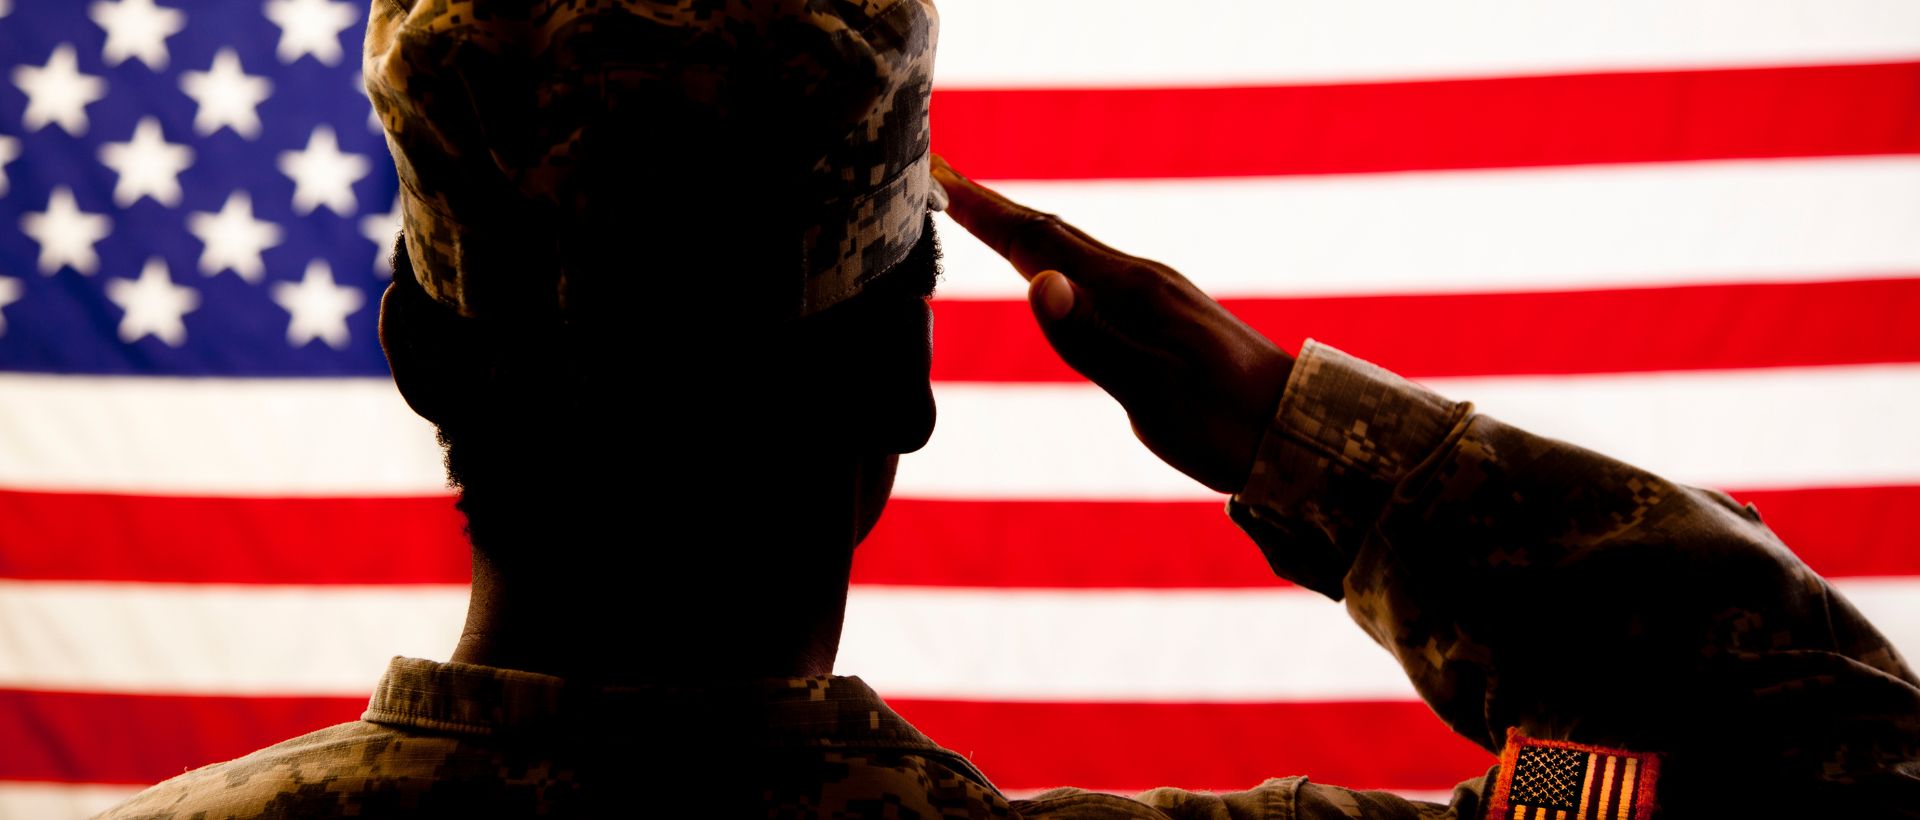 silhouette of man in military uniform saluting the US flag